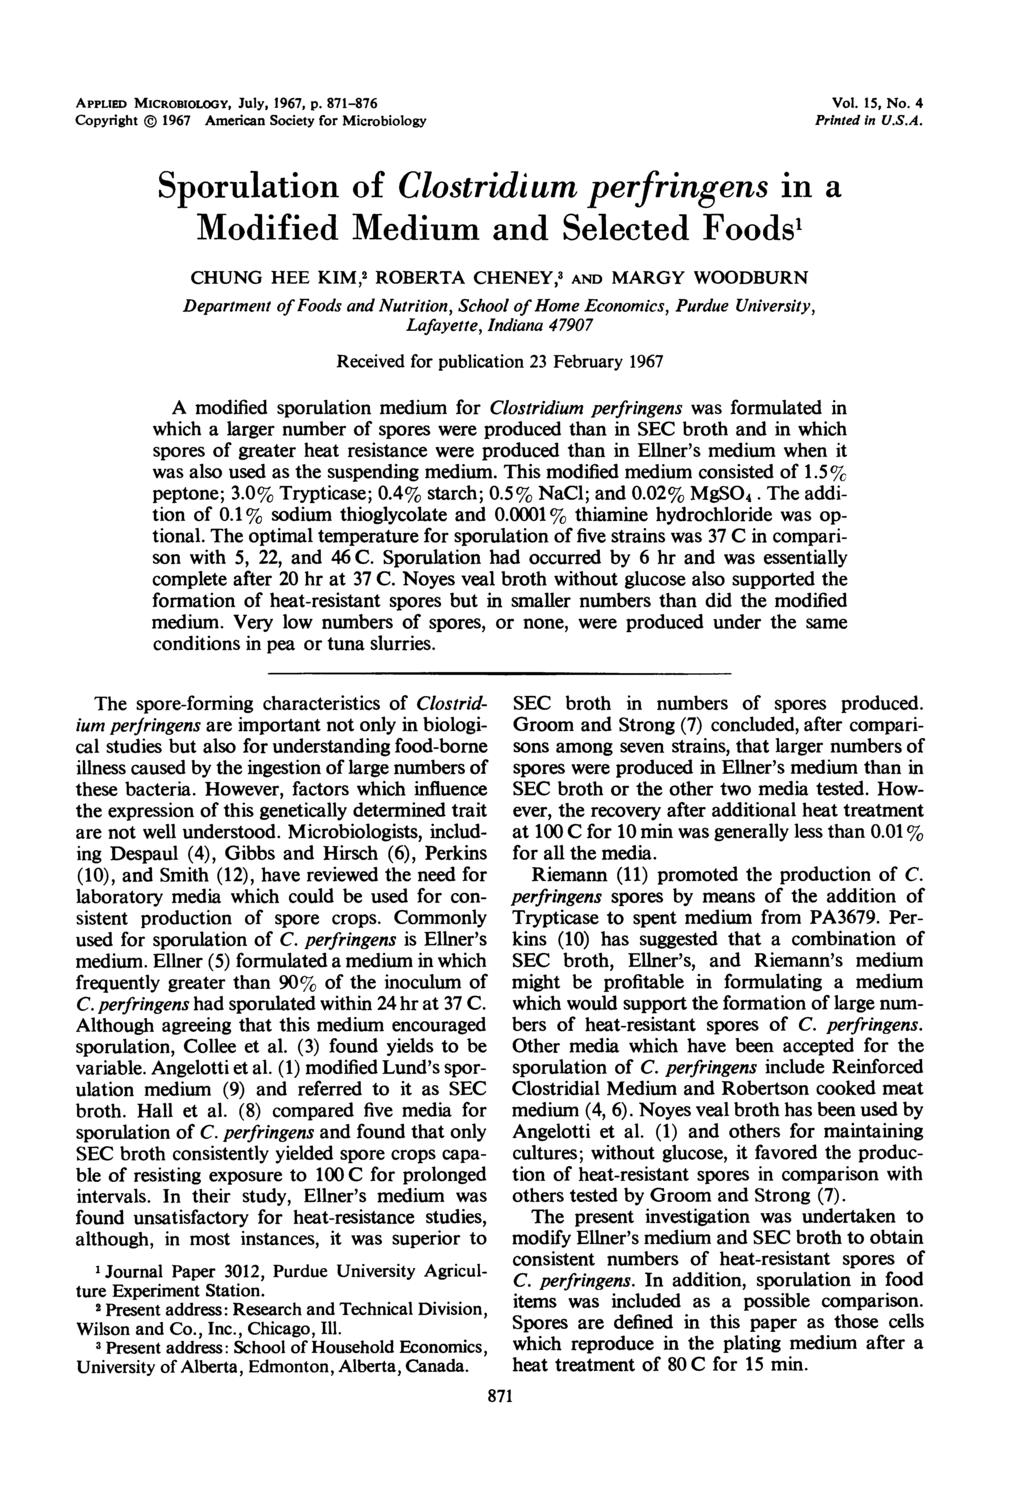 APPLIED MICROBIOLOGY, July, 1967, p. 871-876 Copyright 1967 American Society for Microbiology Vol. 15, No. 4 Printed in U.S.A. Sporulation of Clostridium perfringens in a Modified Medium and Selected